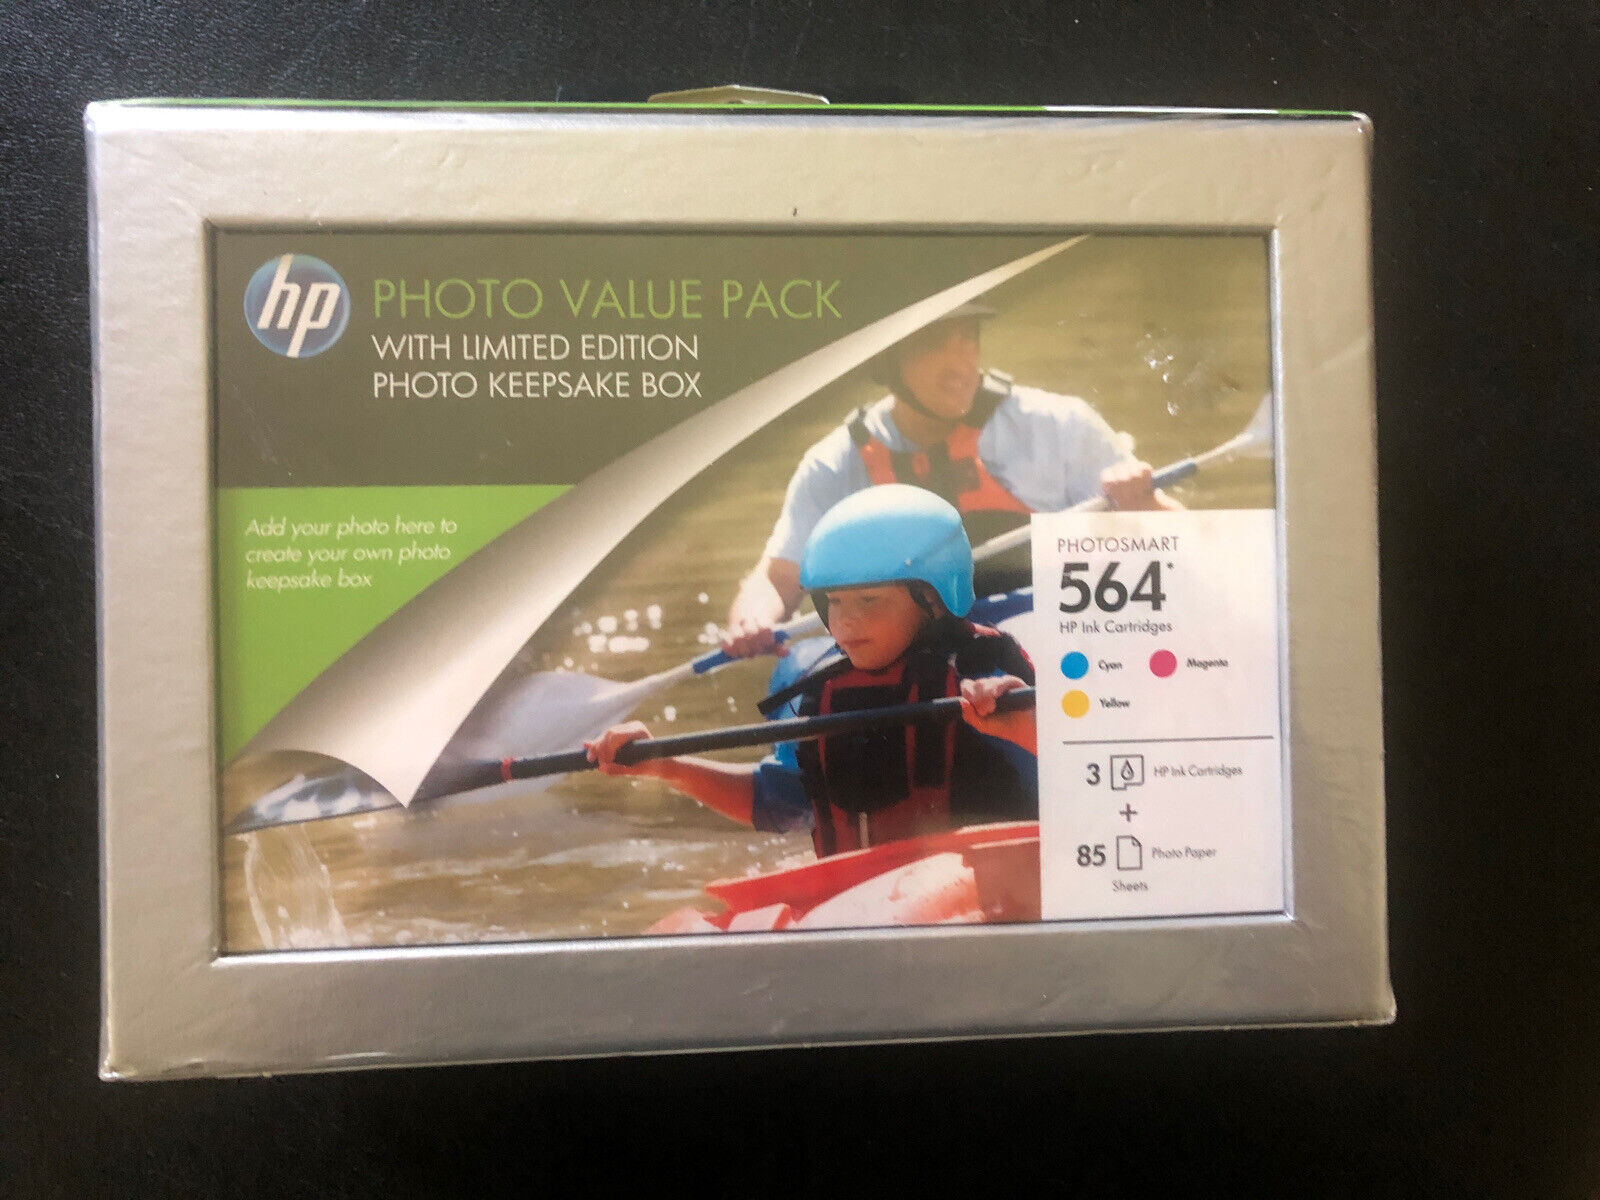 HP~Photo Value Pack 3 Ink Color Cartridges 85 4 x 6 glossy sheets photo paper